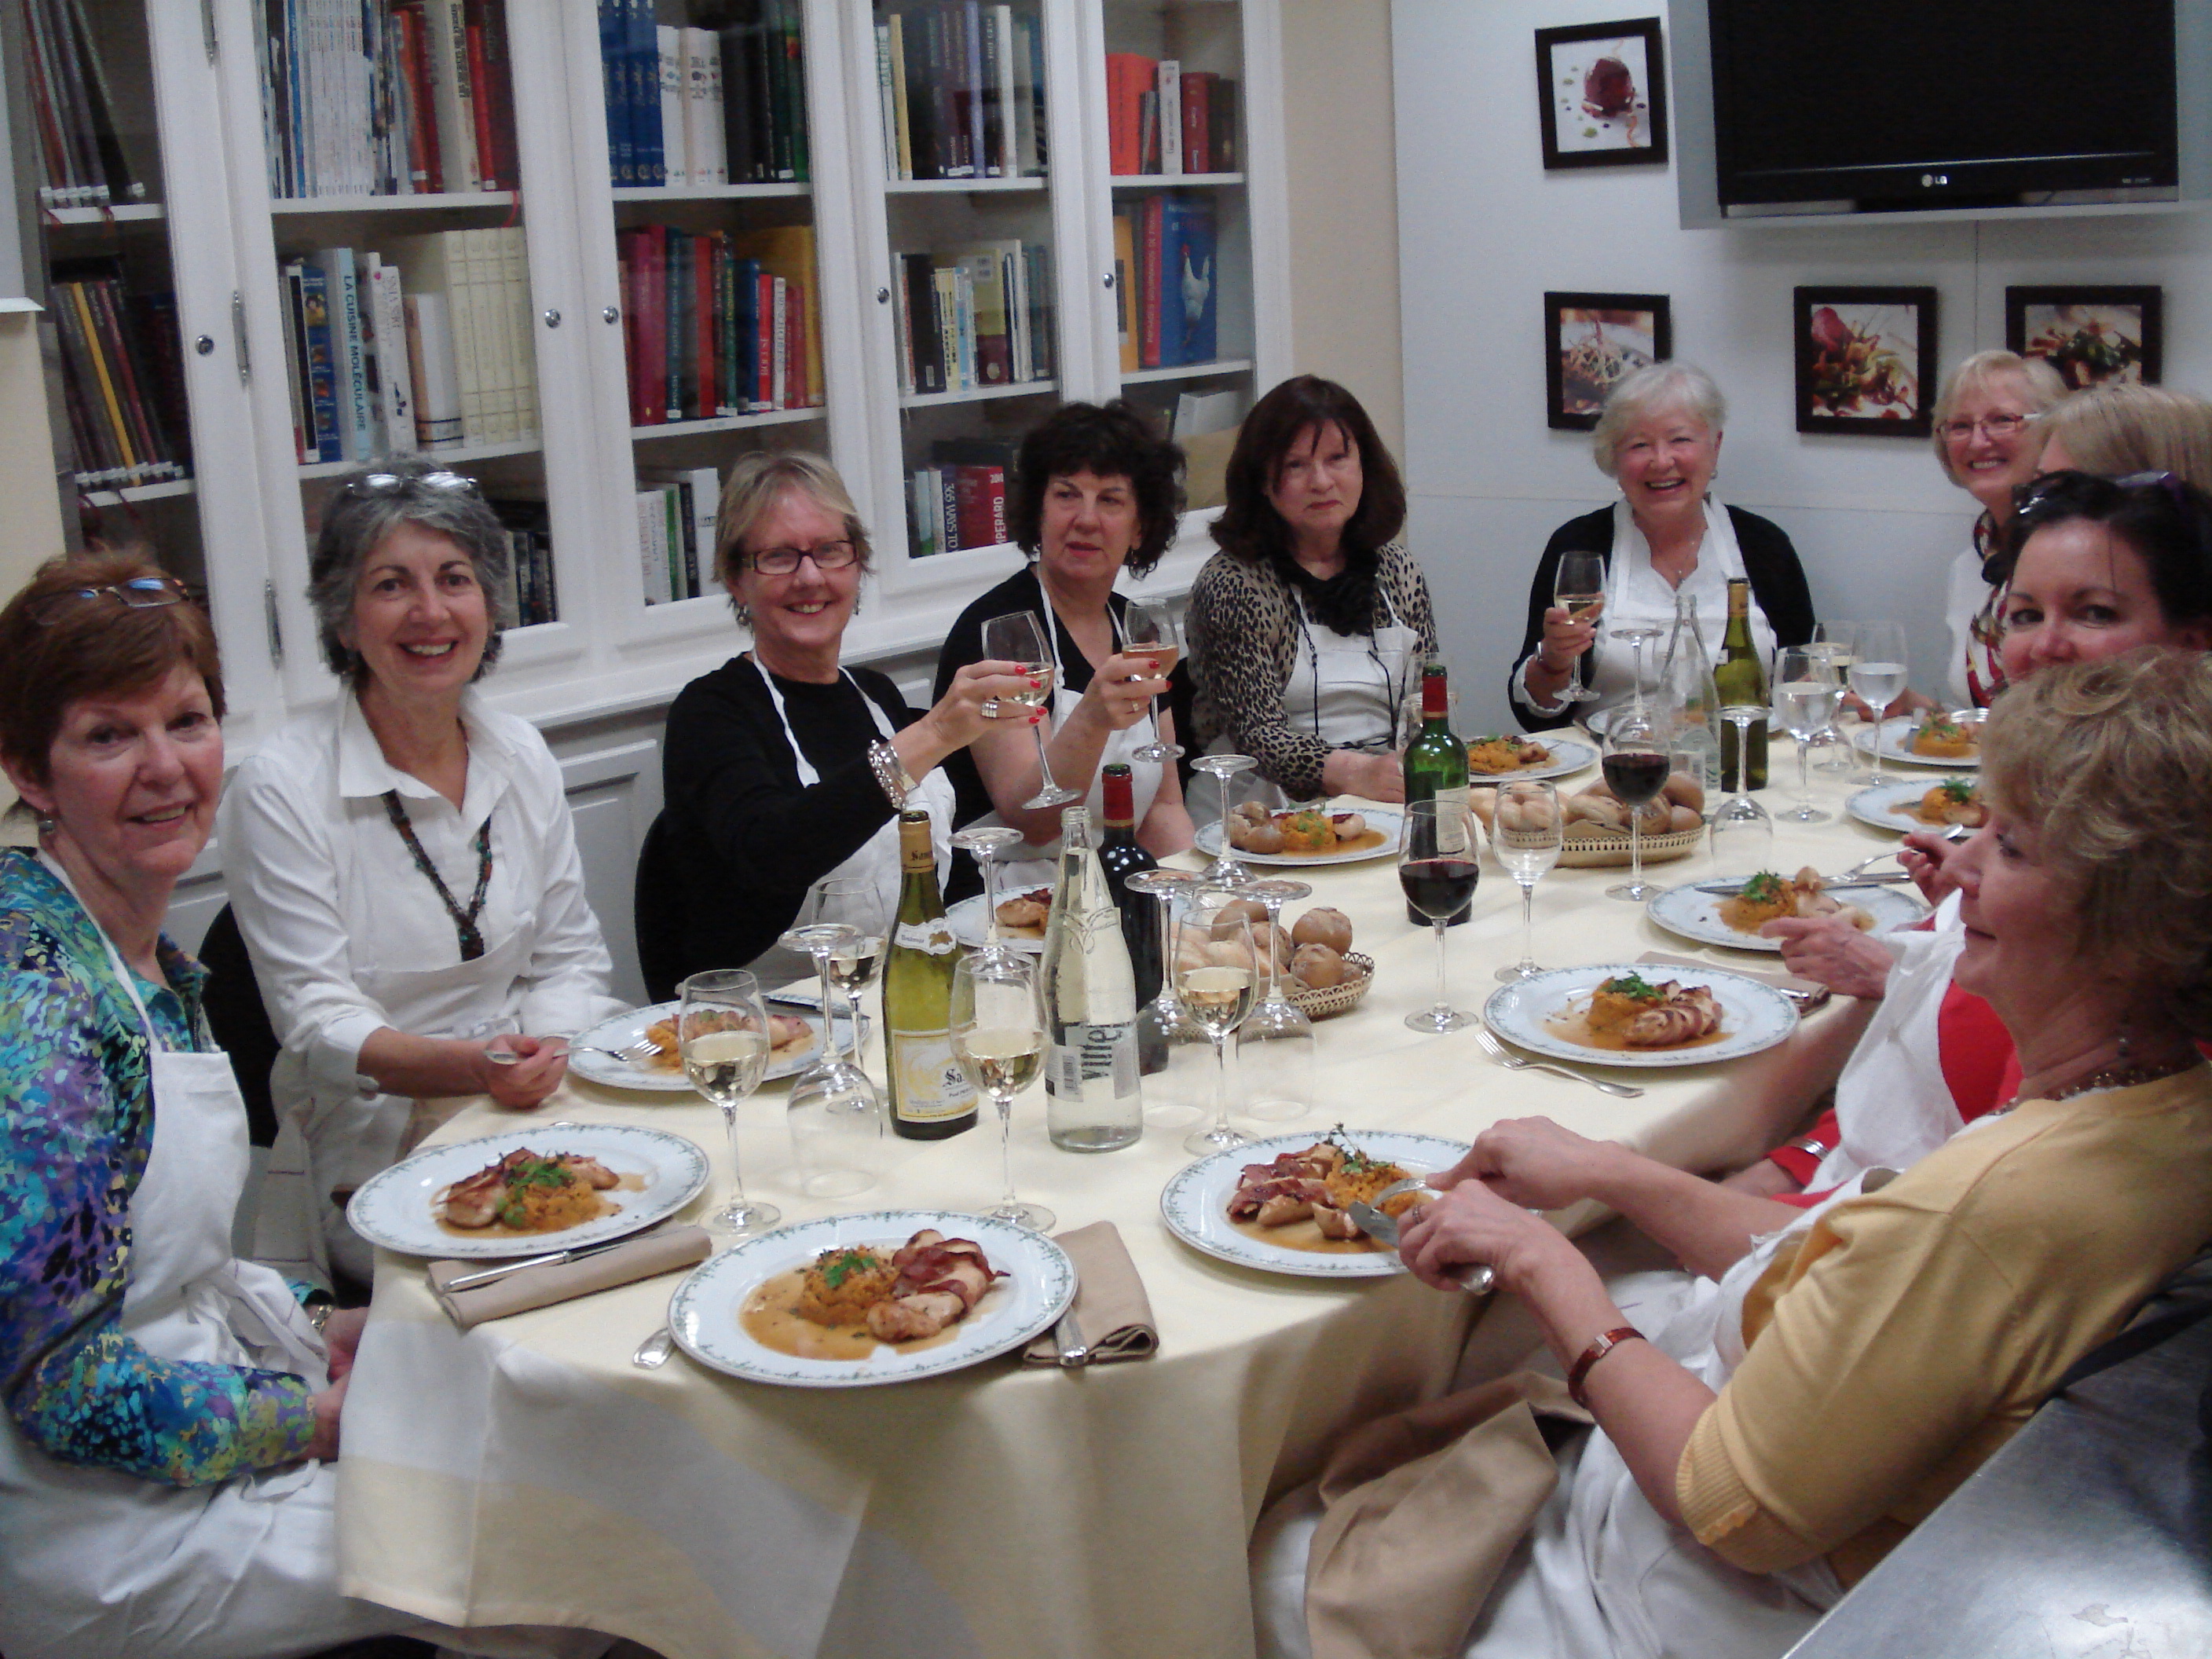 Our group of Paris women enjoying the meal we prepared after our cooking class at the Paris Ritz Hotel. That's me, second from the left swilling a delightful Sancerre.